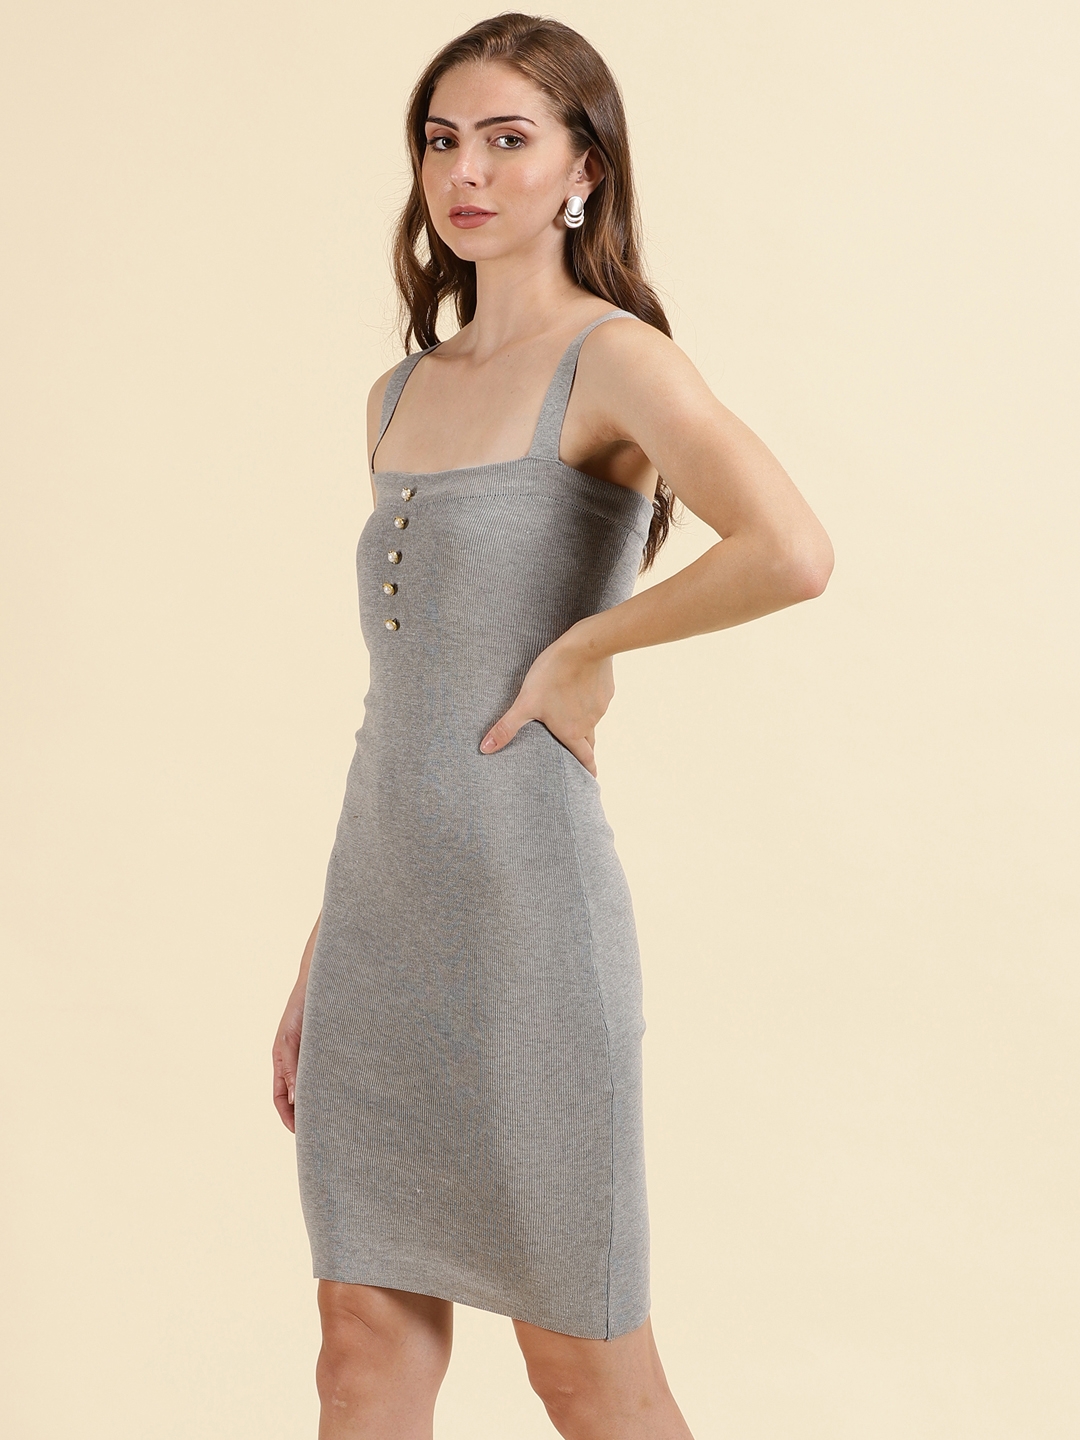 Showoff | SHOWOFF Women's Above Knee Solid Bodycon Grey Dress 2